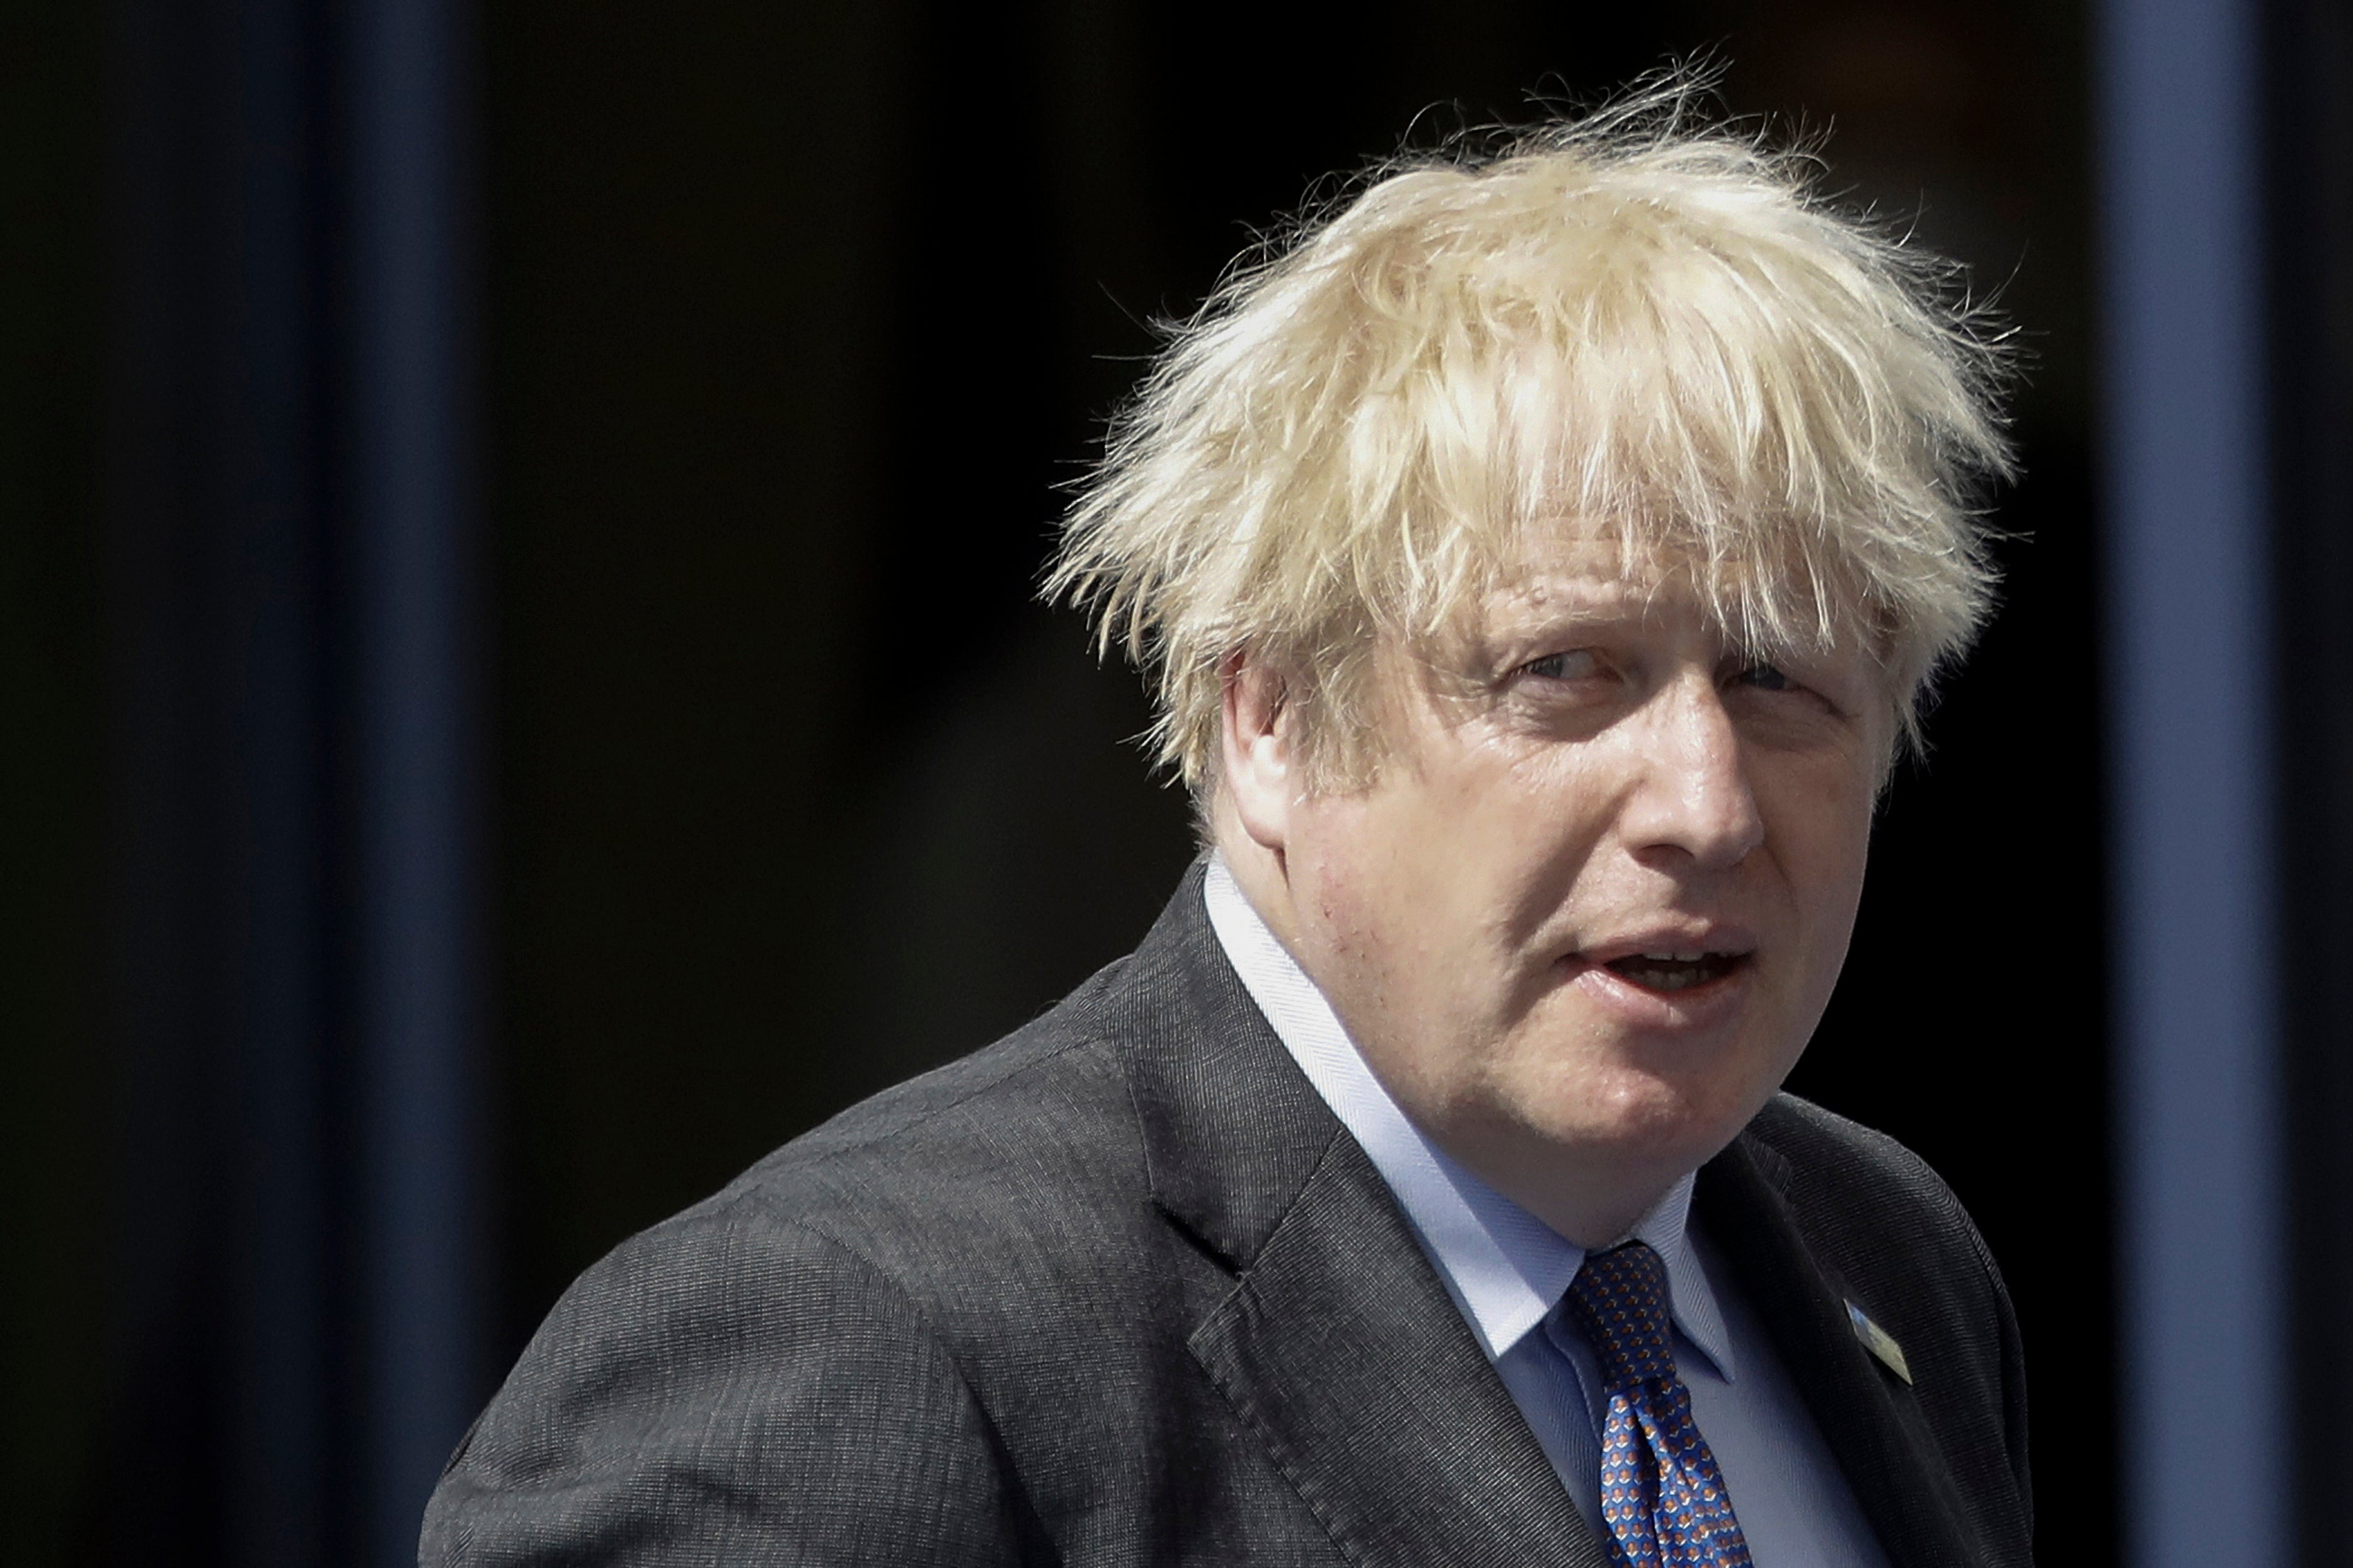 Boris Johnson is set to delay loosening restrictions in England amid concerns about the spread of the Indian Covid variant